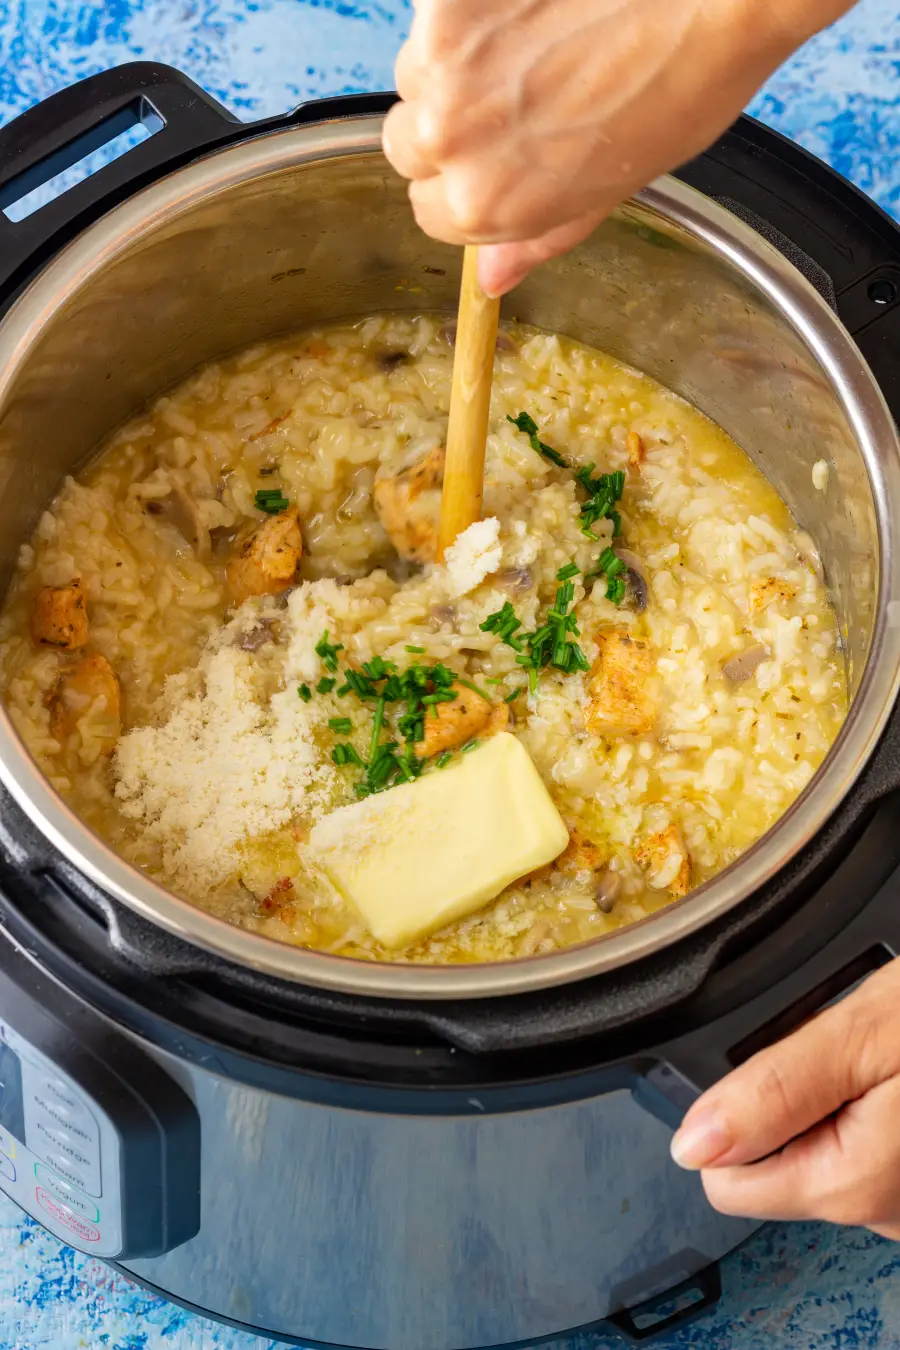 Cozy Up With These 15 Delicious Fall Instant Pot Recipes!